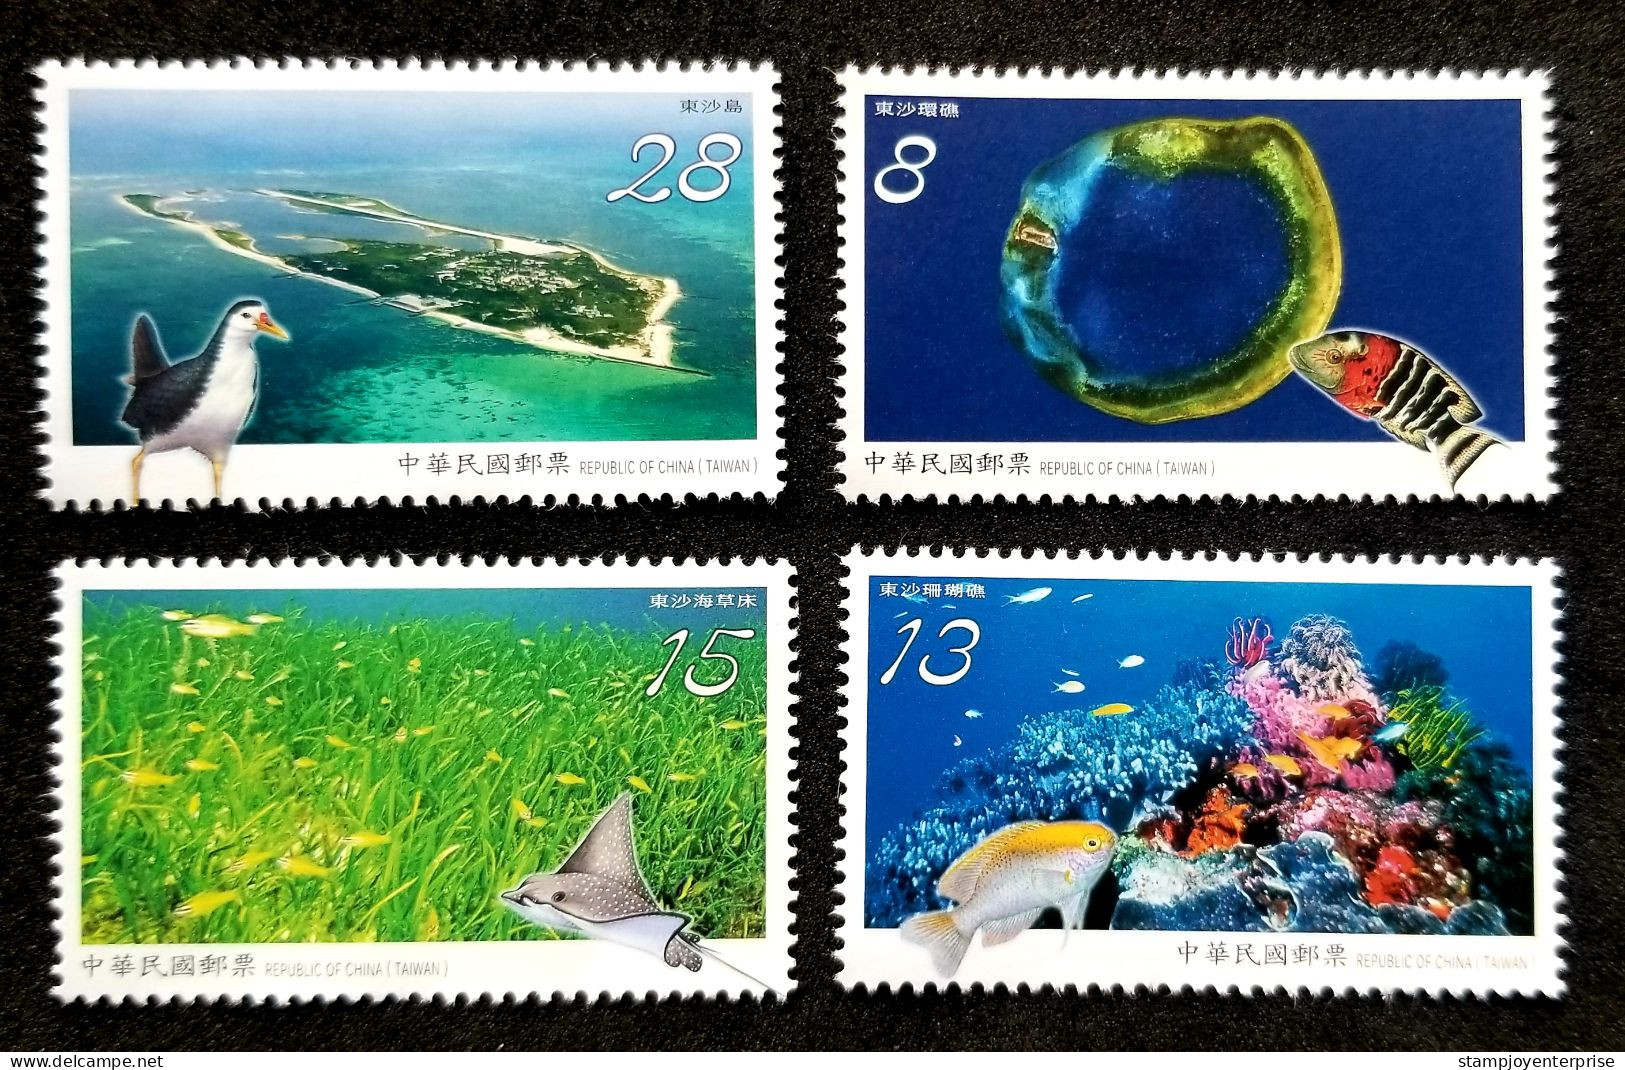 Taiwan Dongsha Atoll National Park 2019 Bird Ray Fish Marine Life Coral Reef Corals Underwater (stamp) MNH - Unused Stamps